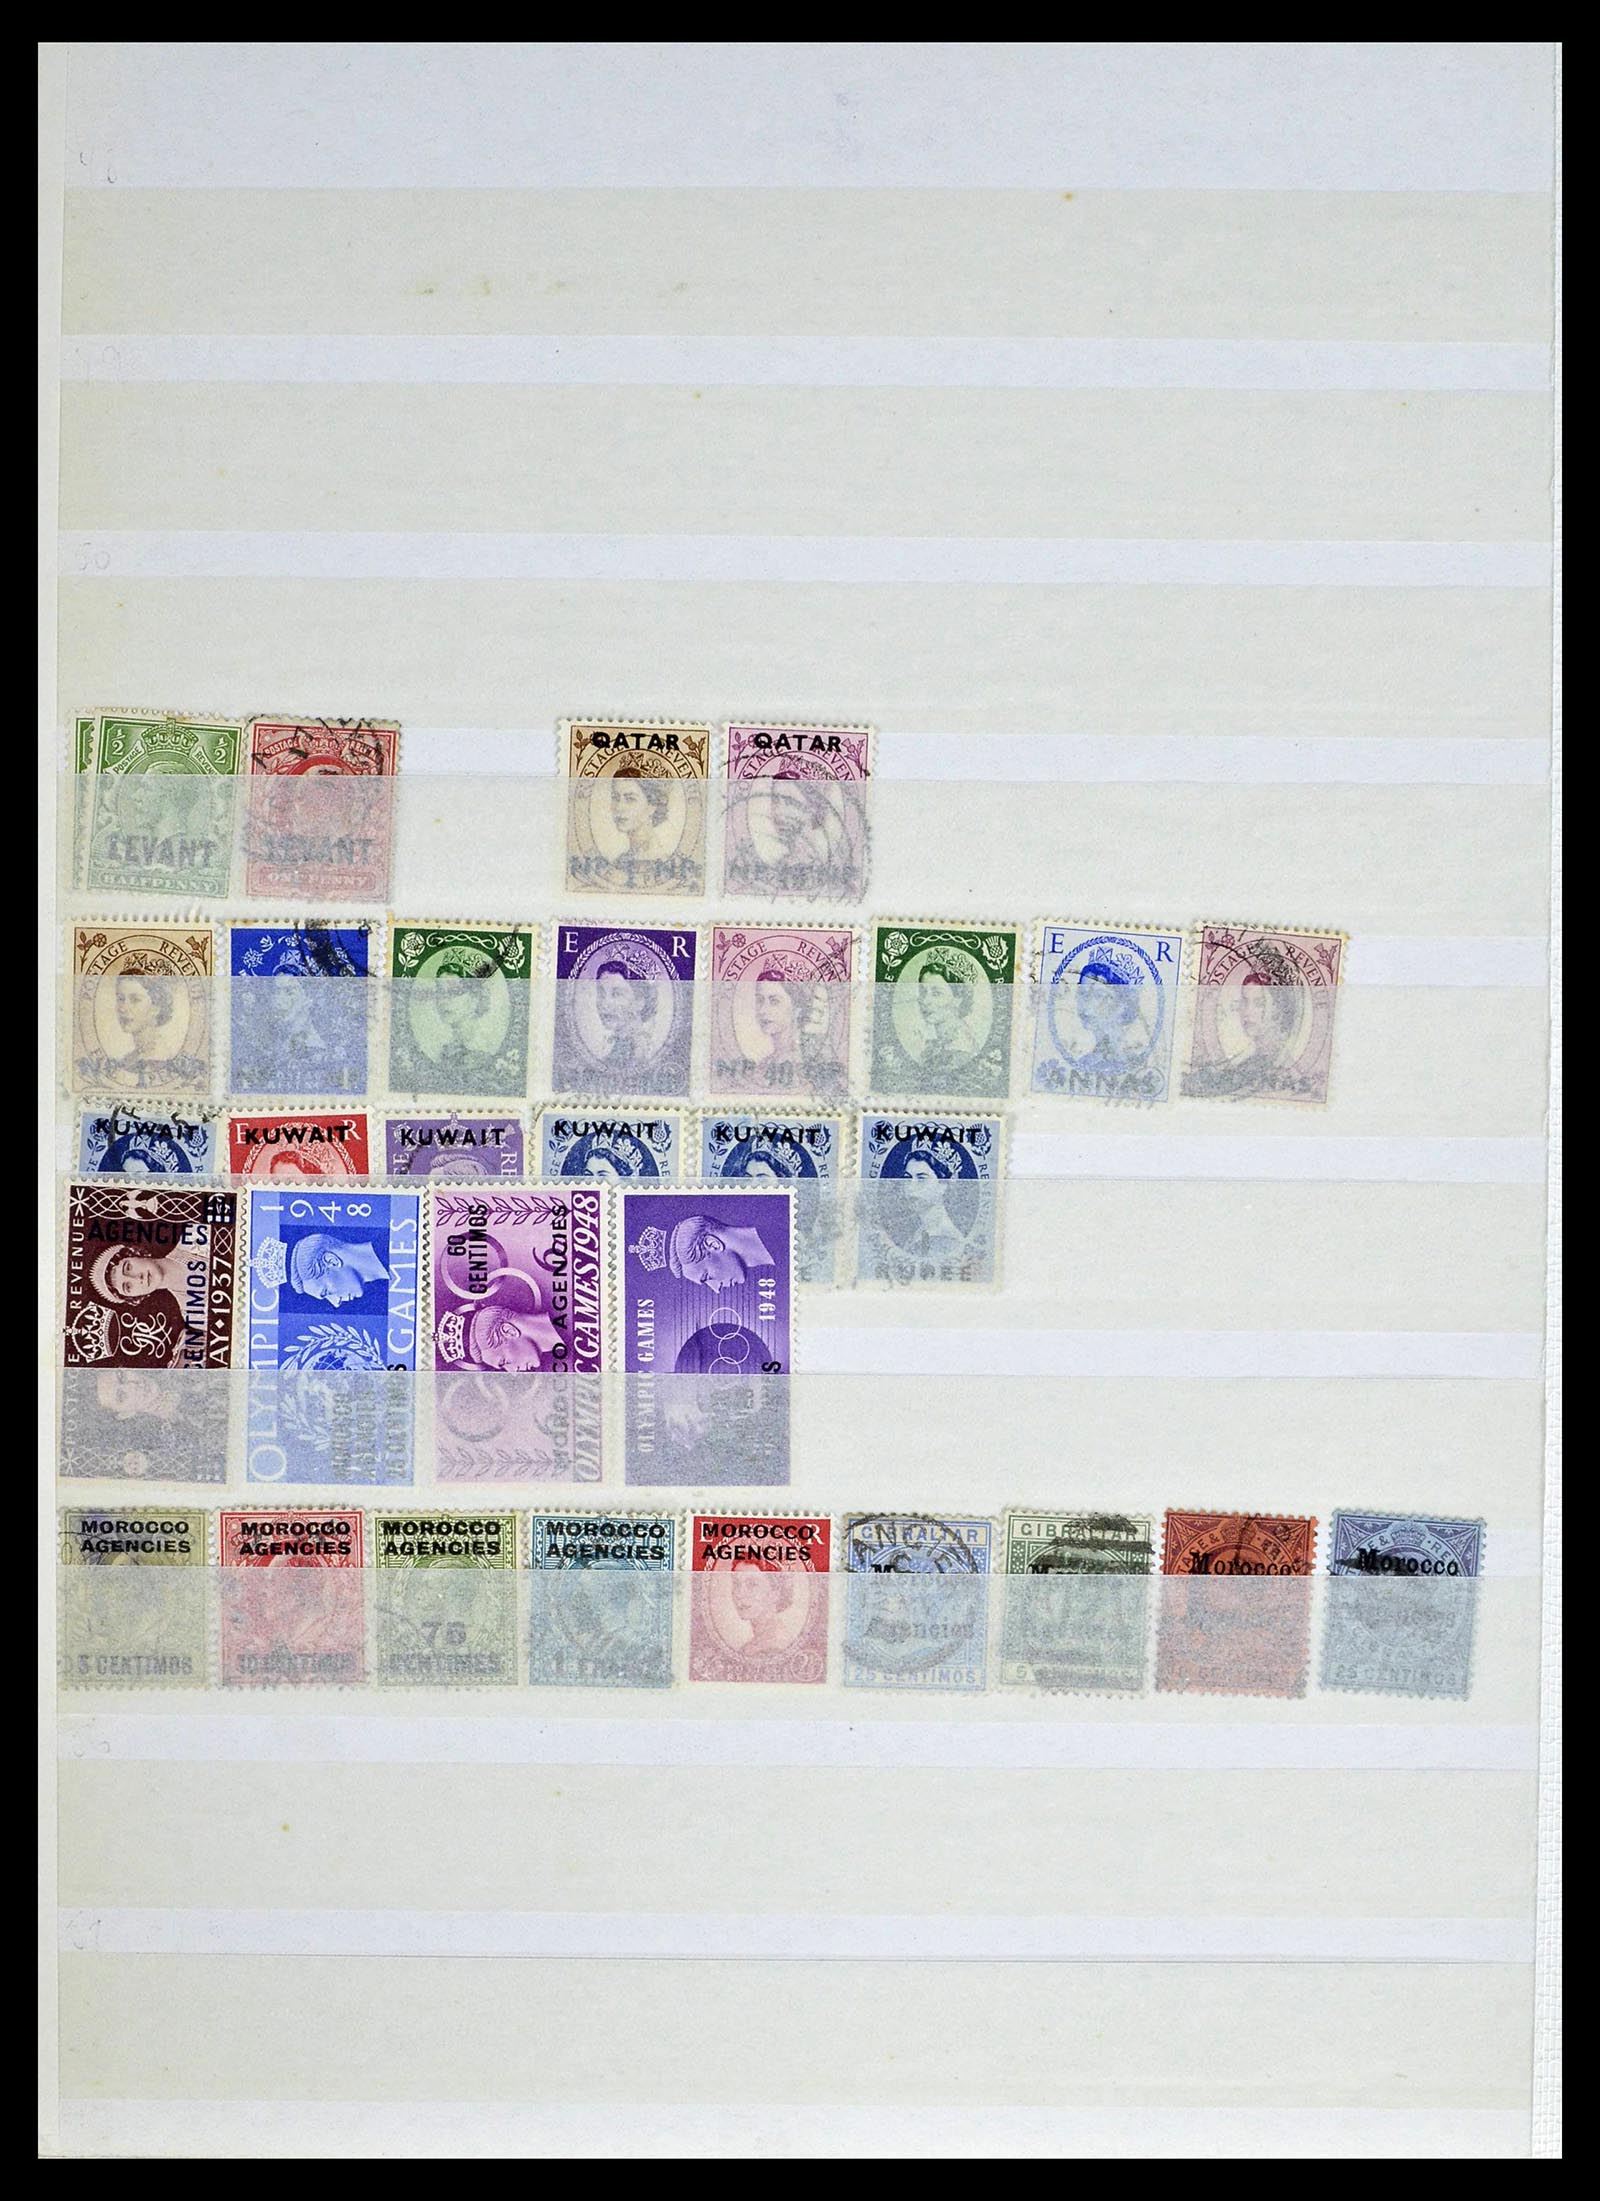 39196 0066 - Stamp collection 39196 Great Britain 1844-1955.